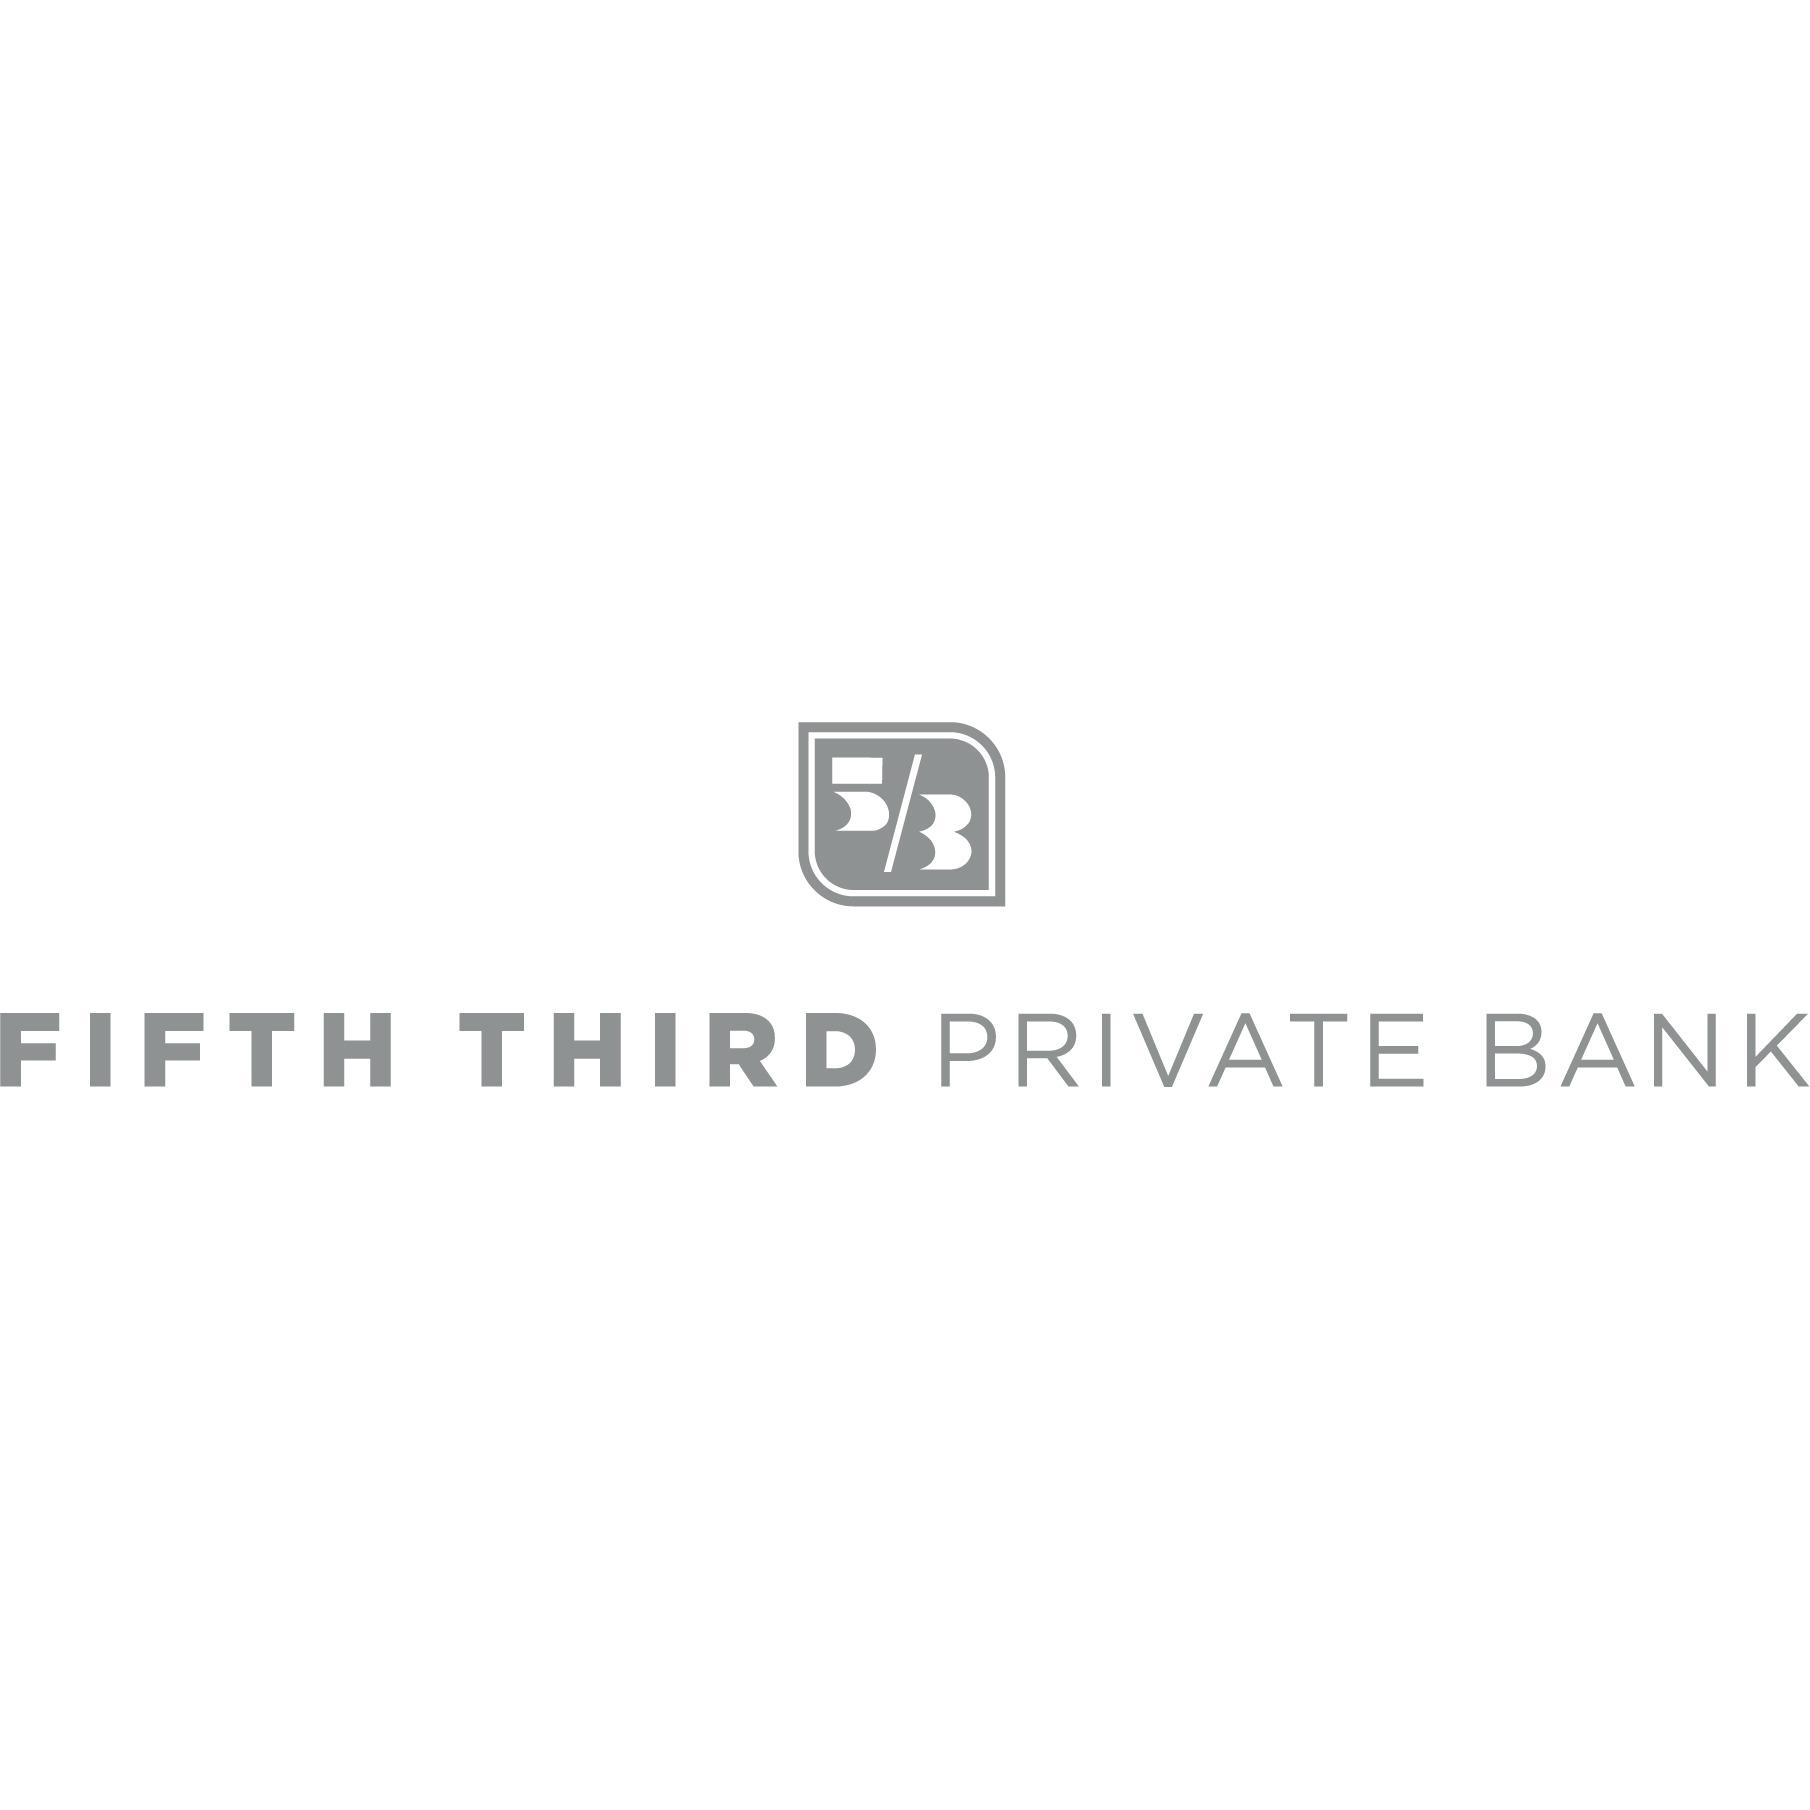 Fifth Third Private Bank - James McColskey Photo